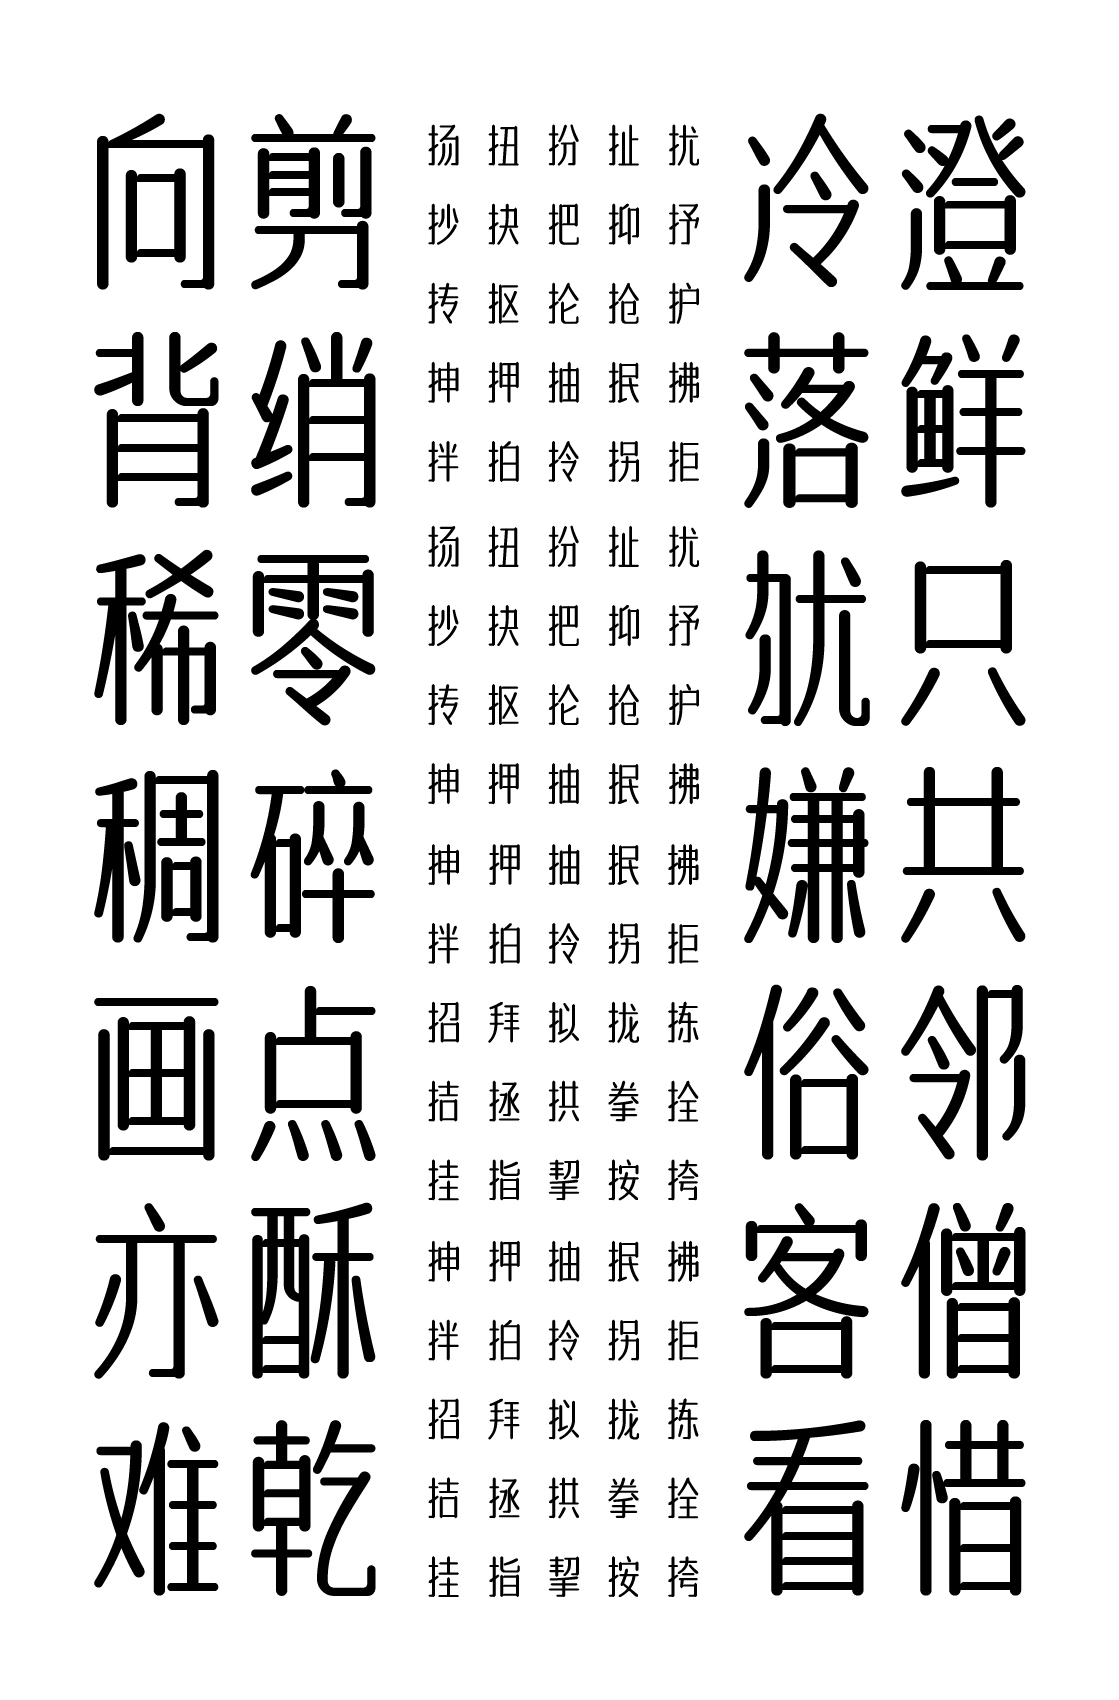 A font with round font design-legendary Nan 'an style